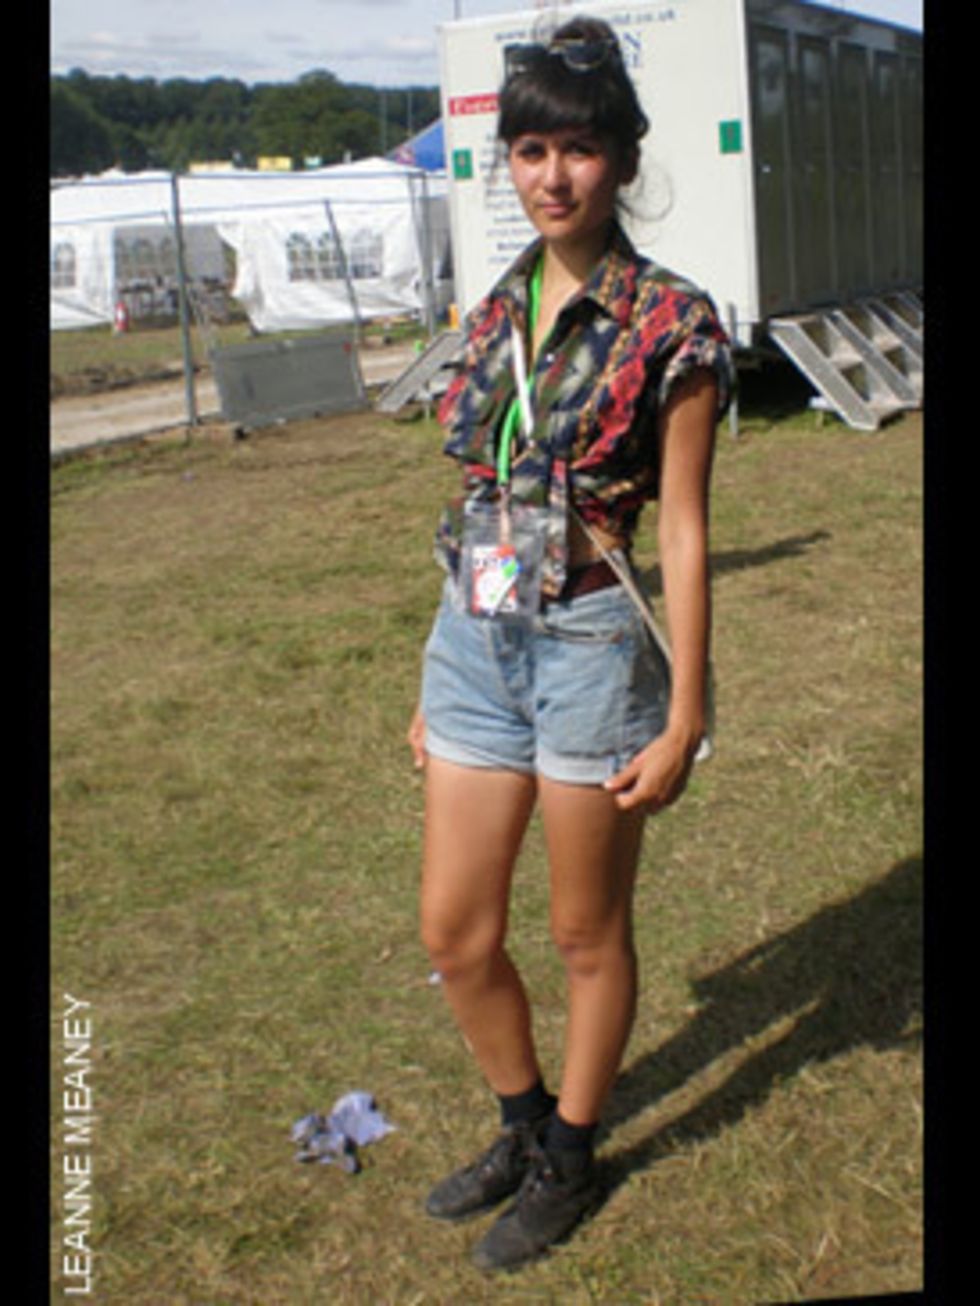 <p>Lucy Hottram, 20, works in PR. Wearing a top from wrangler, shorts from Levis and vintage boots.</p>